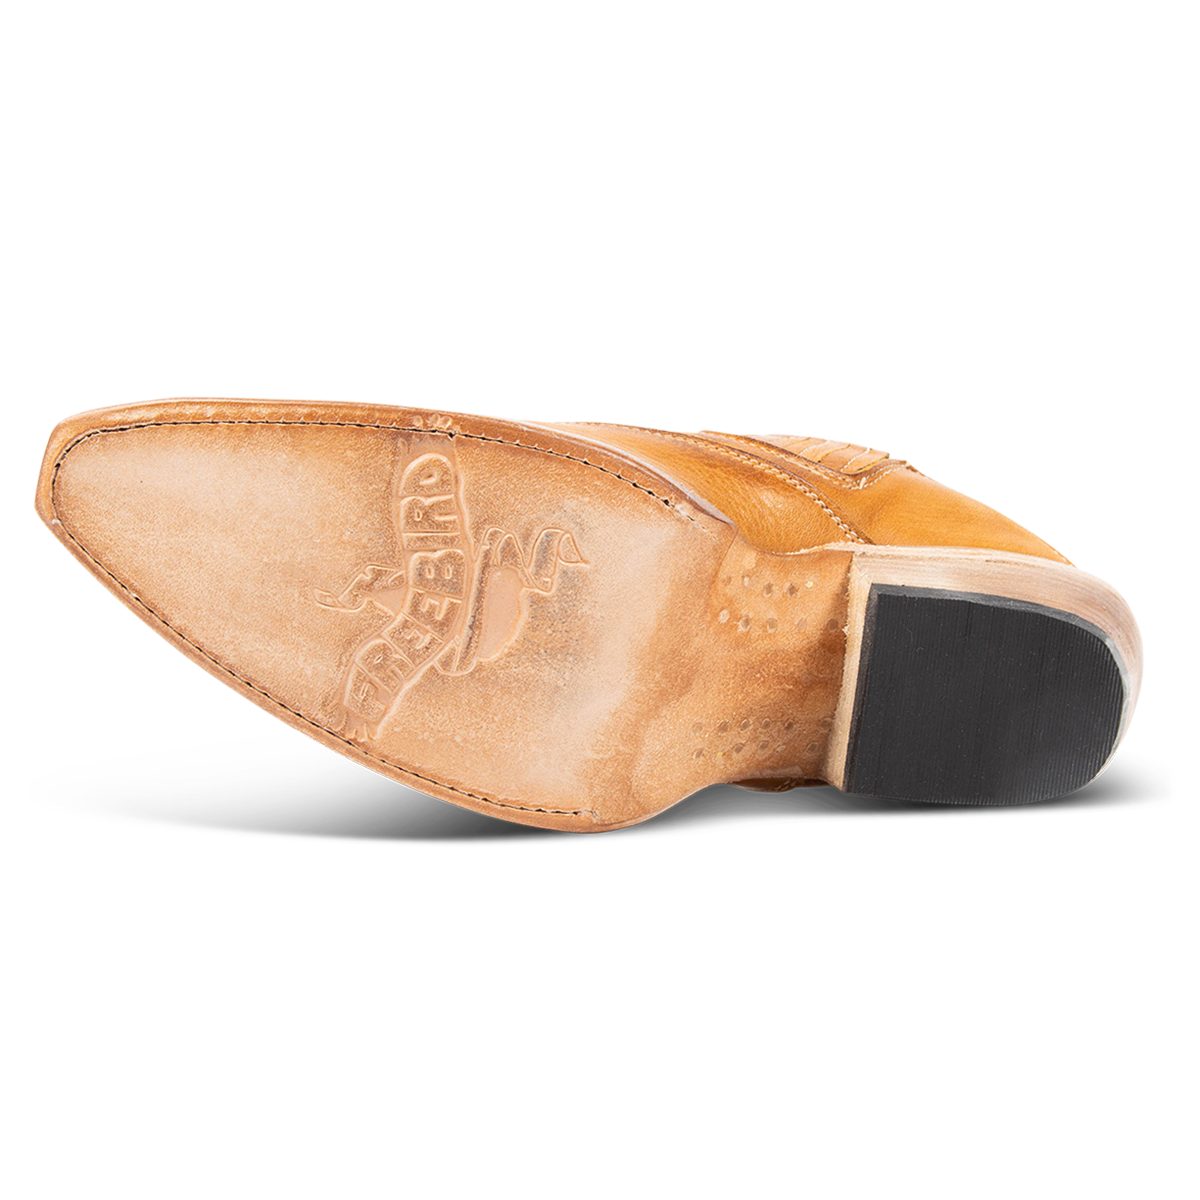 Leather sole imprinted with FREEBIRD on women's Wentworth wheat western mule